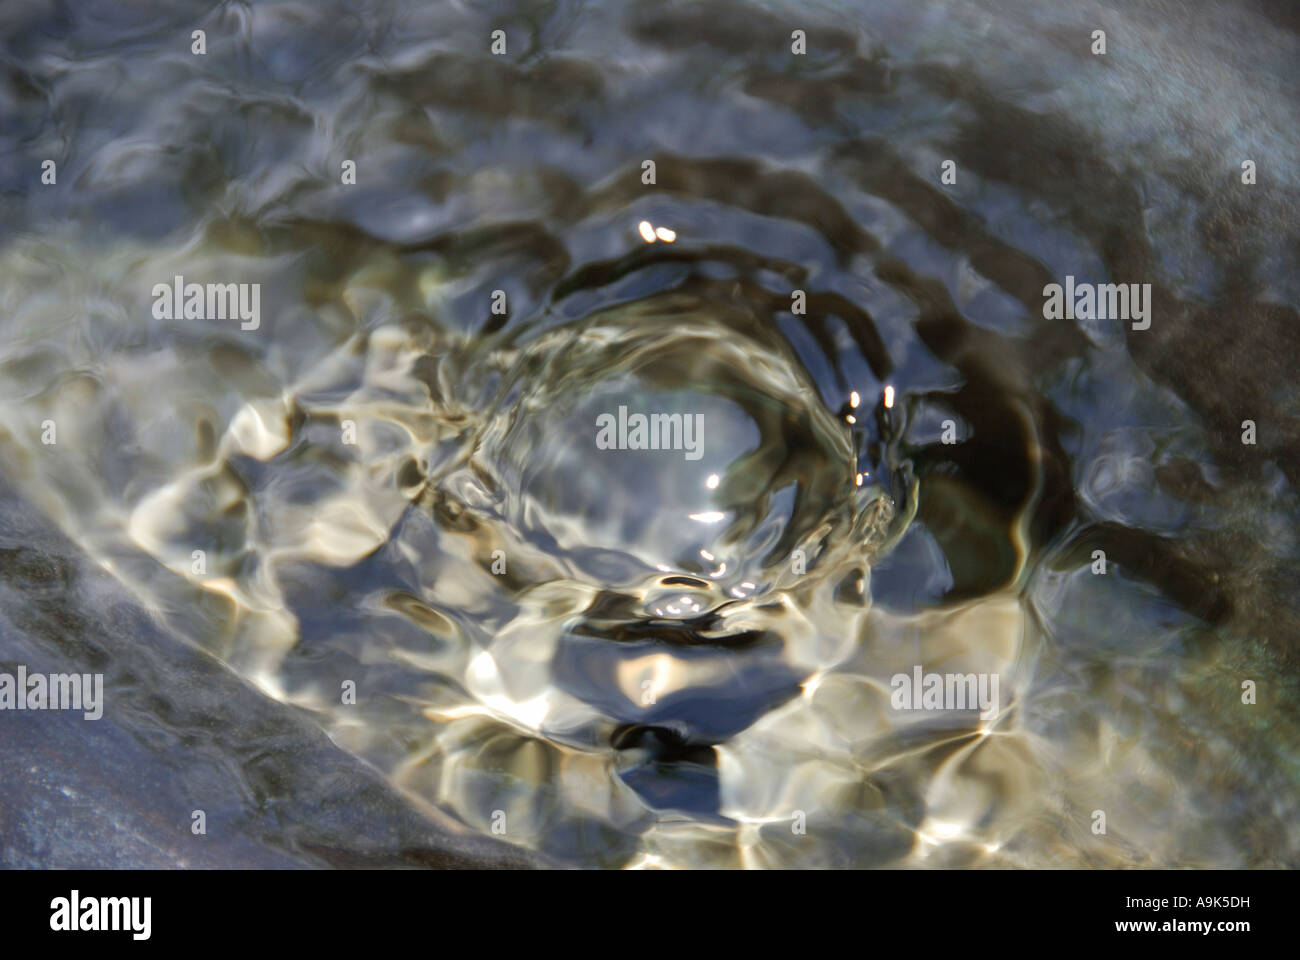 'Water 'welling up' from a spring in a stone fountain, California' Stock Photo